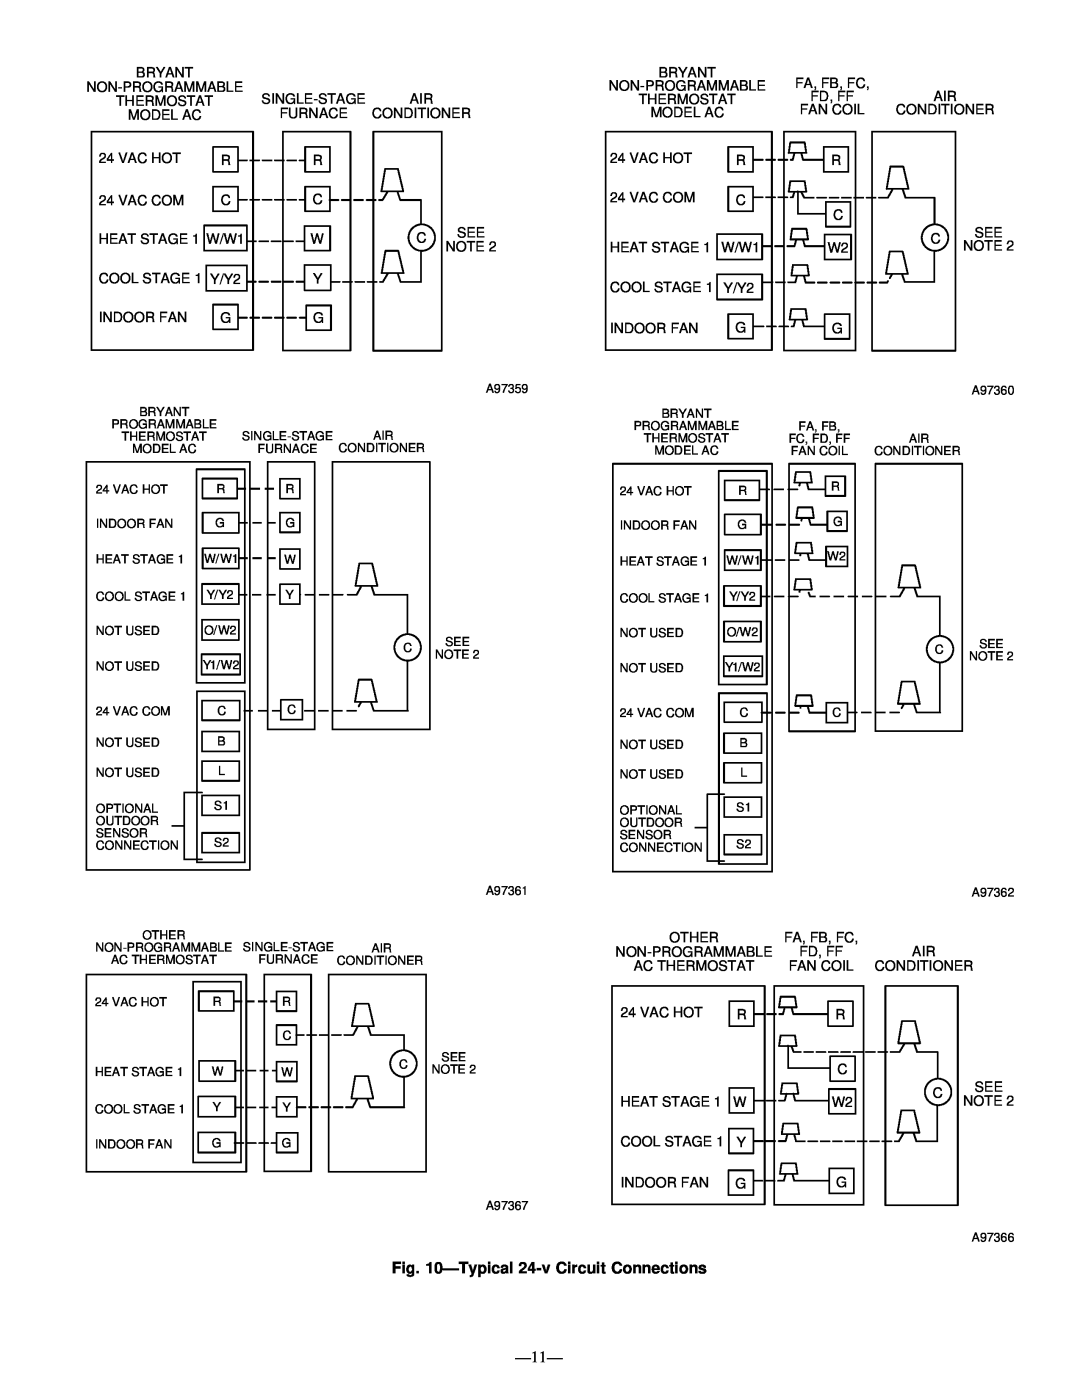 Bryant 550A, 556A, 552A instruction manual Typical 24-vCircuit Connections 